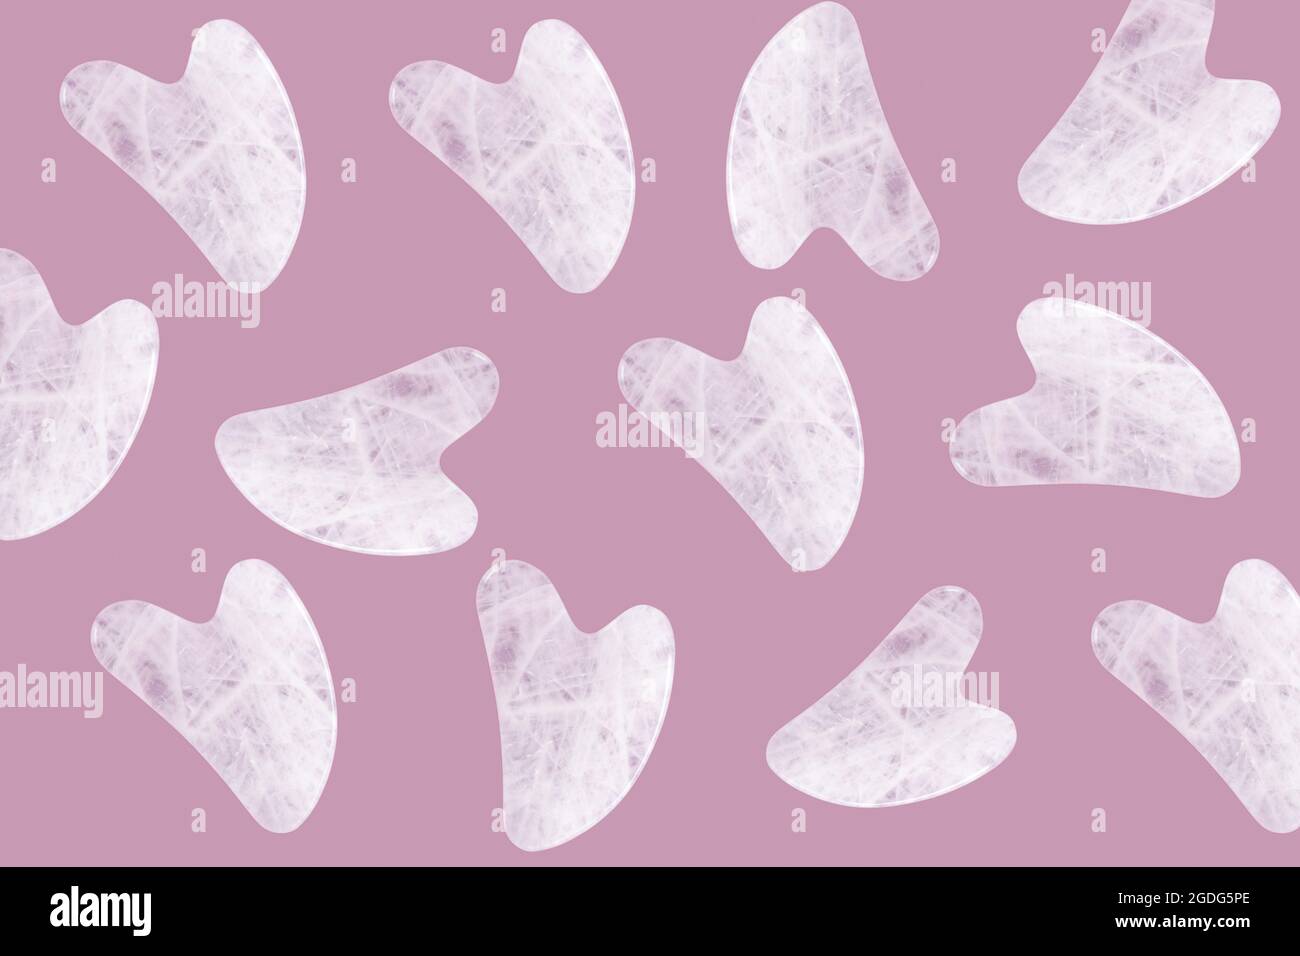 Pattern of pink jade guasha massagers or natural stone scrapers Stock Photo